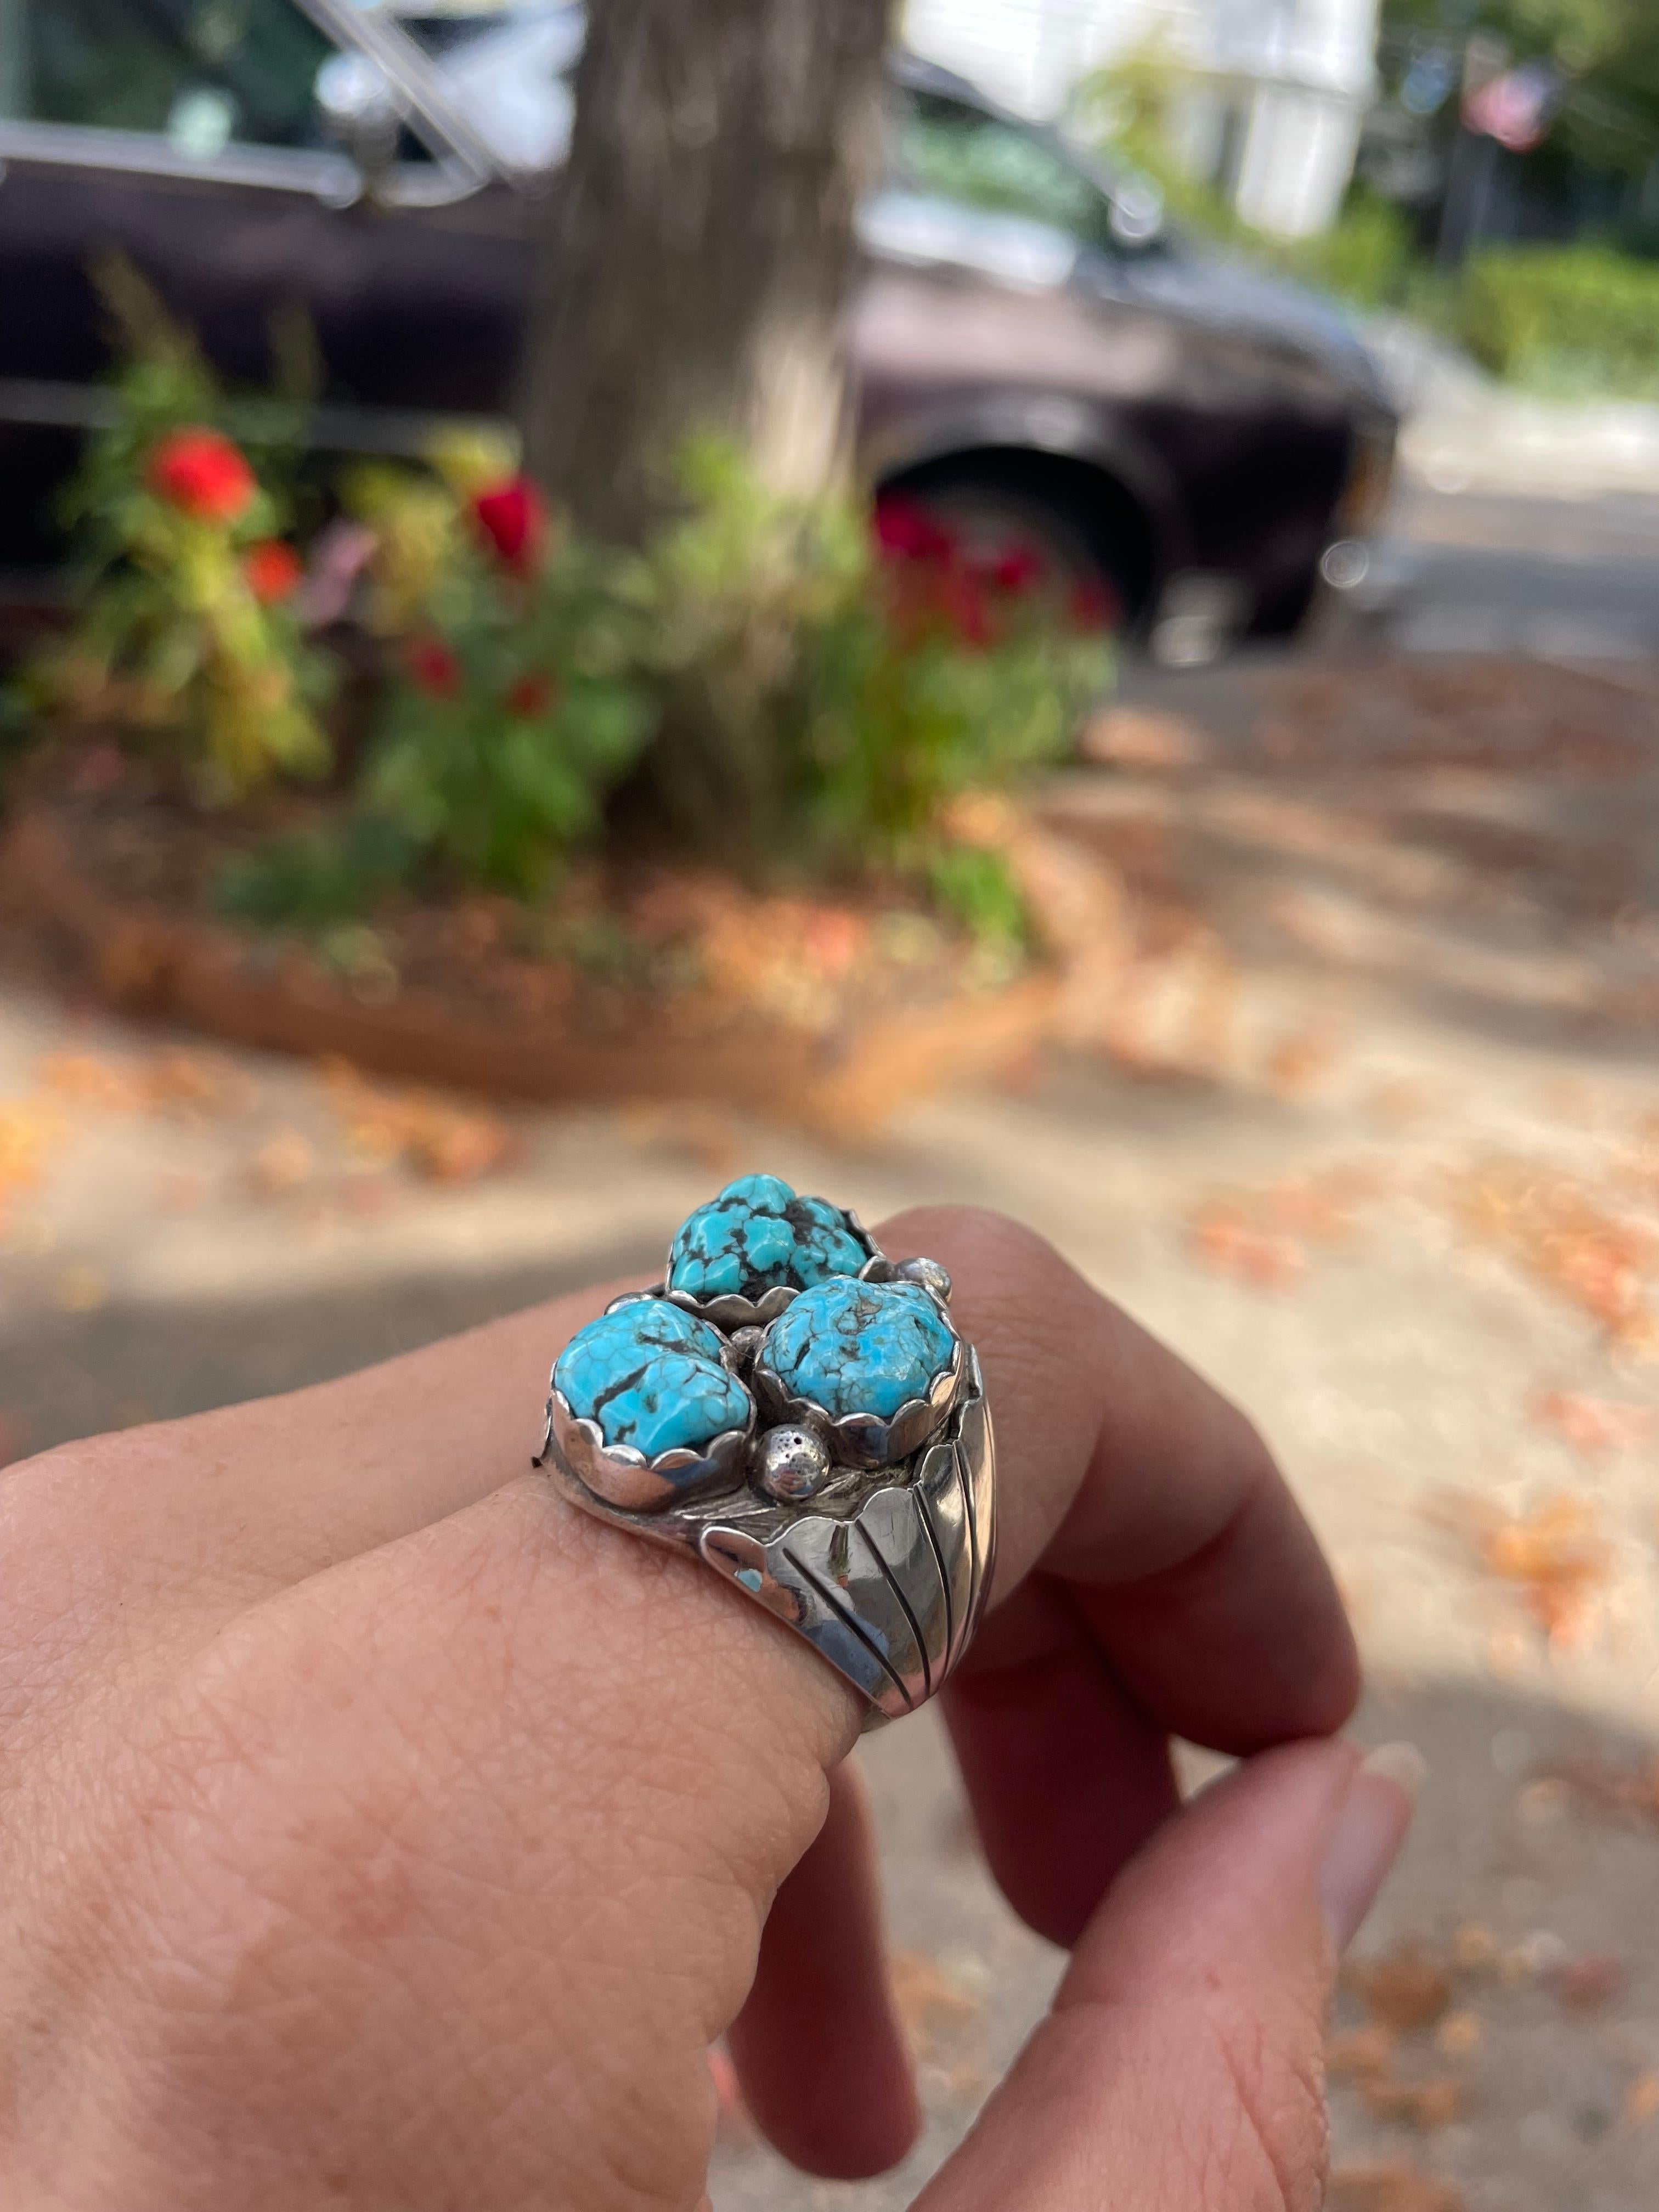 Native American 3 Stone Raw Turquoise Vintage Ring

Amazing Turquoise Ring with 3 Beautiful Raw Turquoise Stones, and Striped Sterling Silver Ring

Size 10 

Stamped 